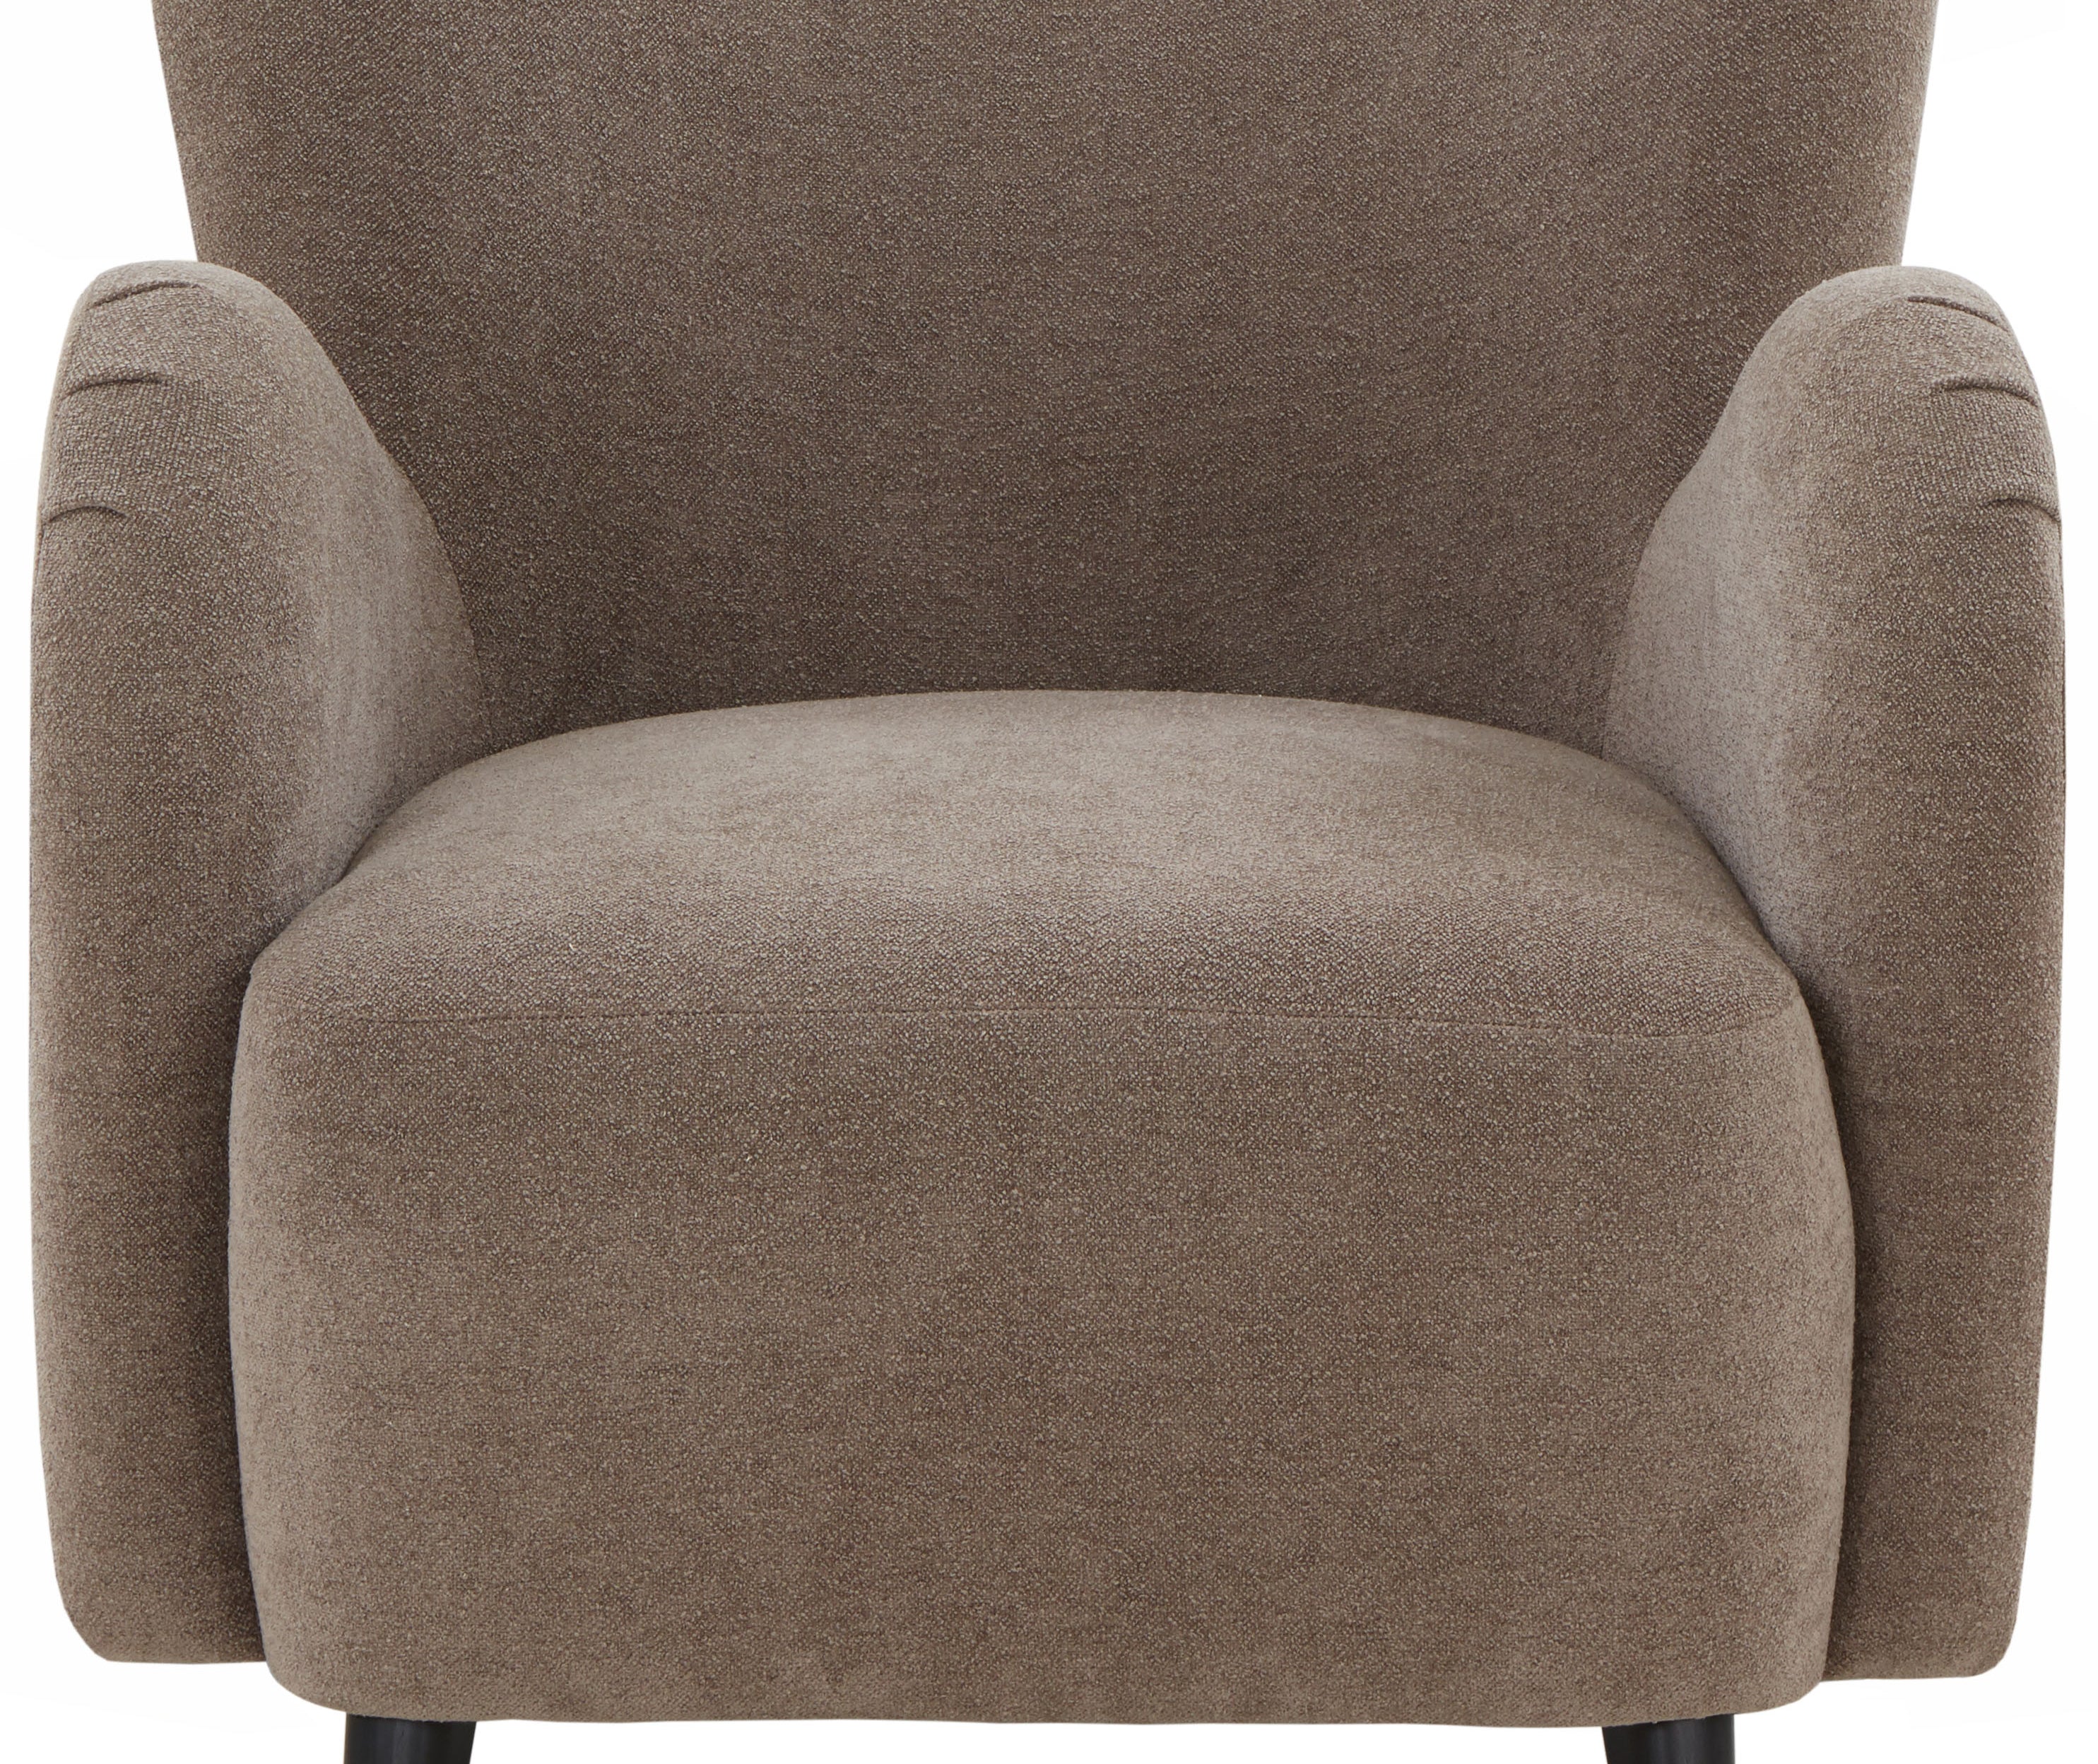 Safavieh Couture Rayanne Mosern Wingback Chair - Brown